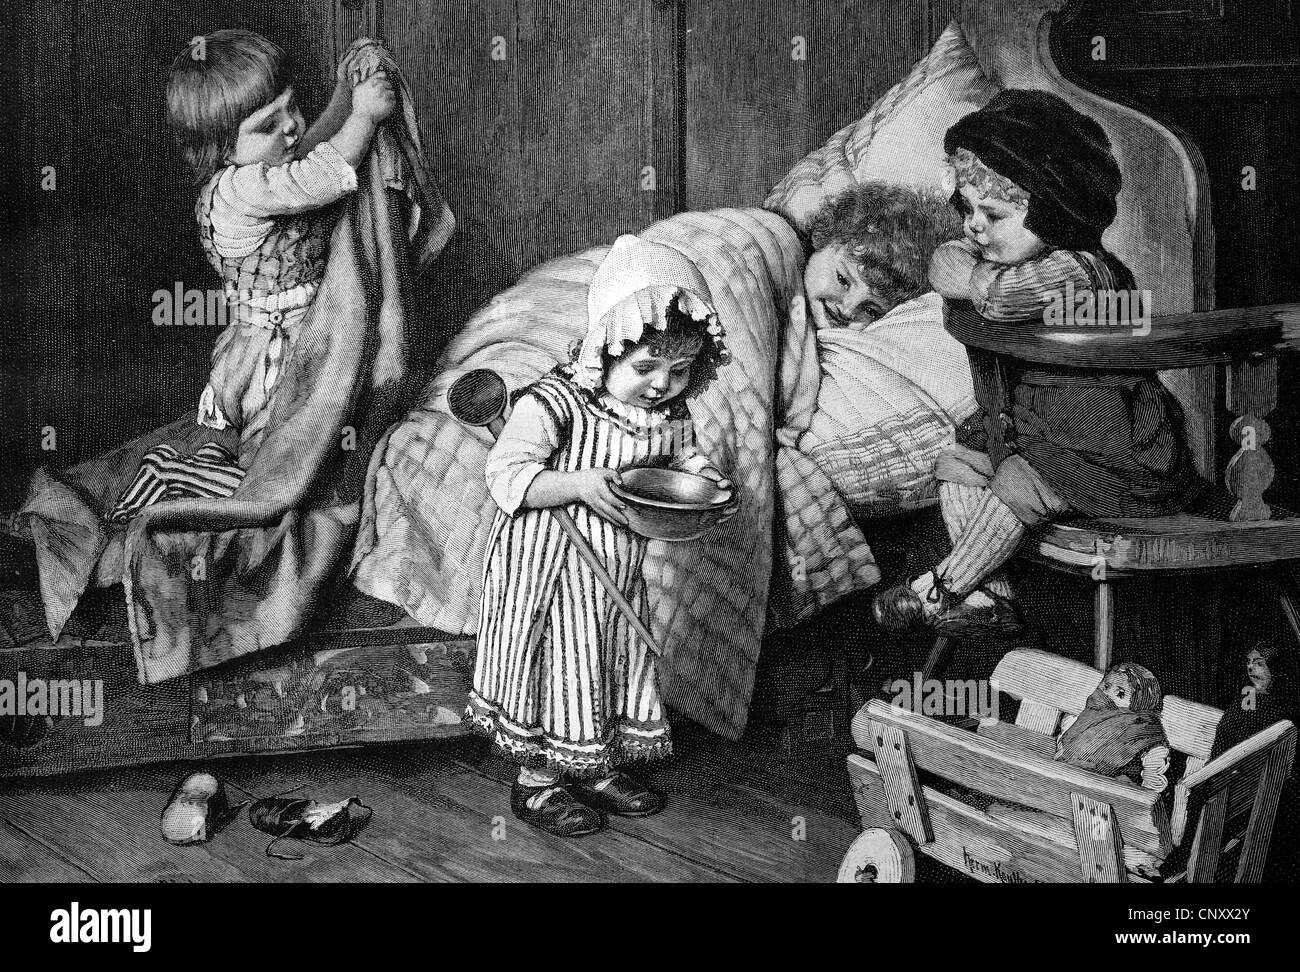 Children playing doctor and patient, historic wood engraving, about 1897 Stock Photo